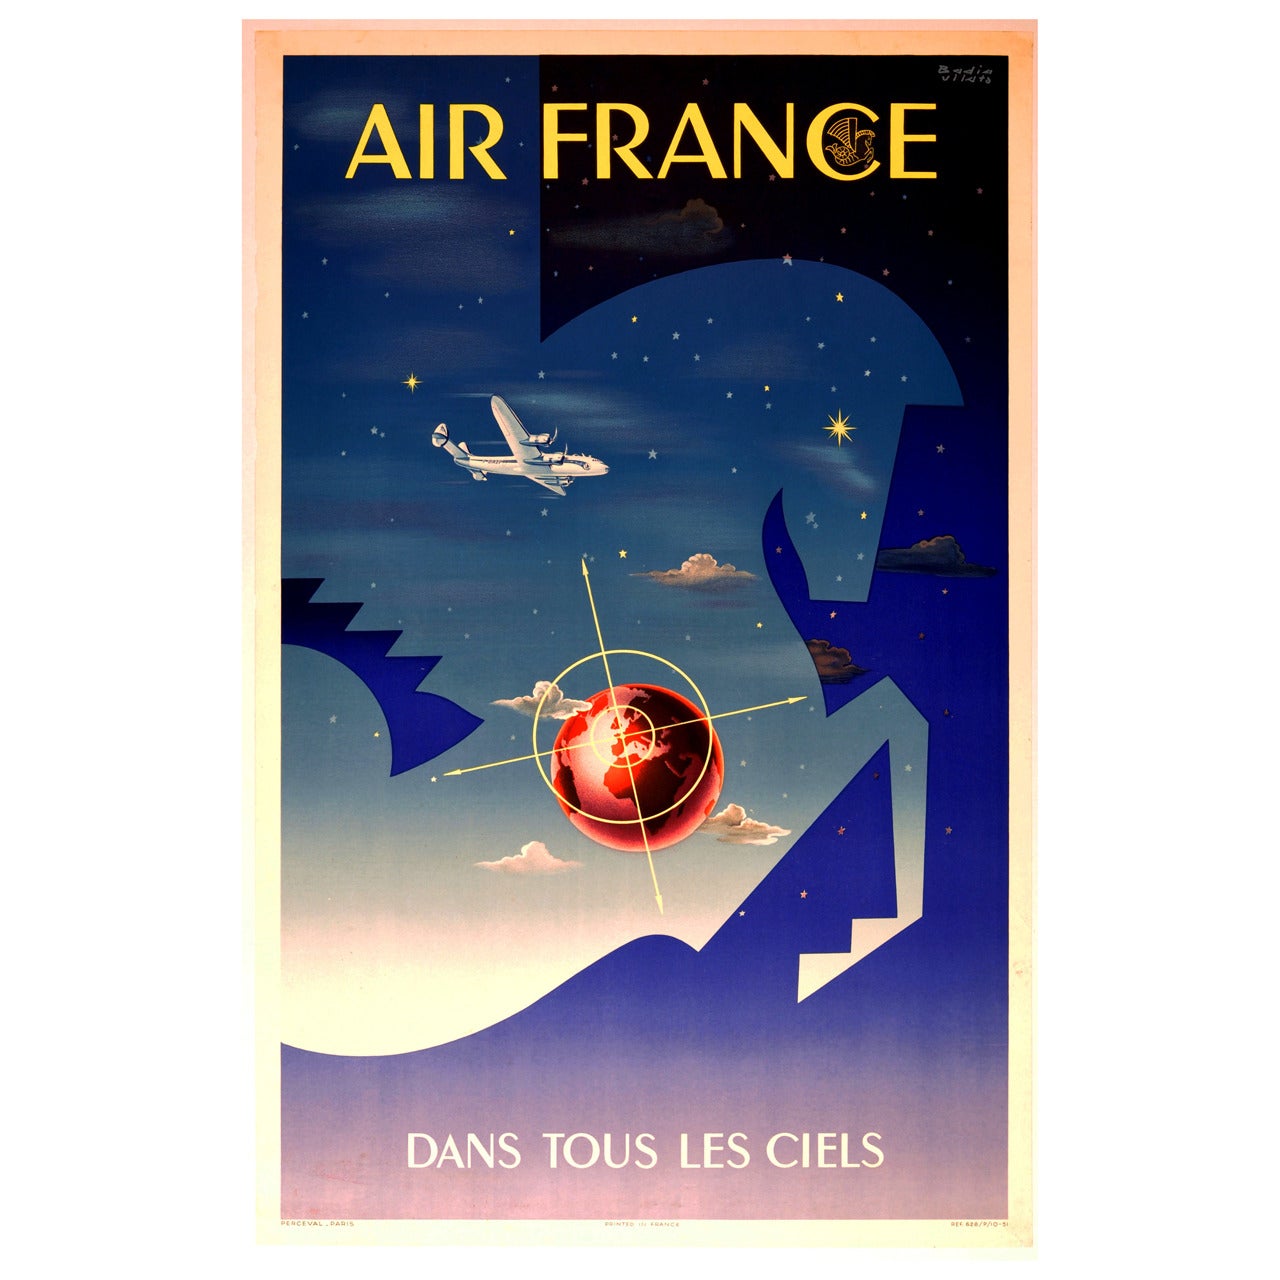 Original vintage Art Deco style advertising poster for Air France